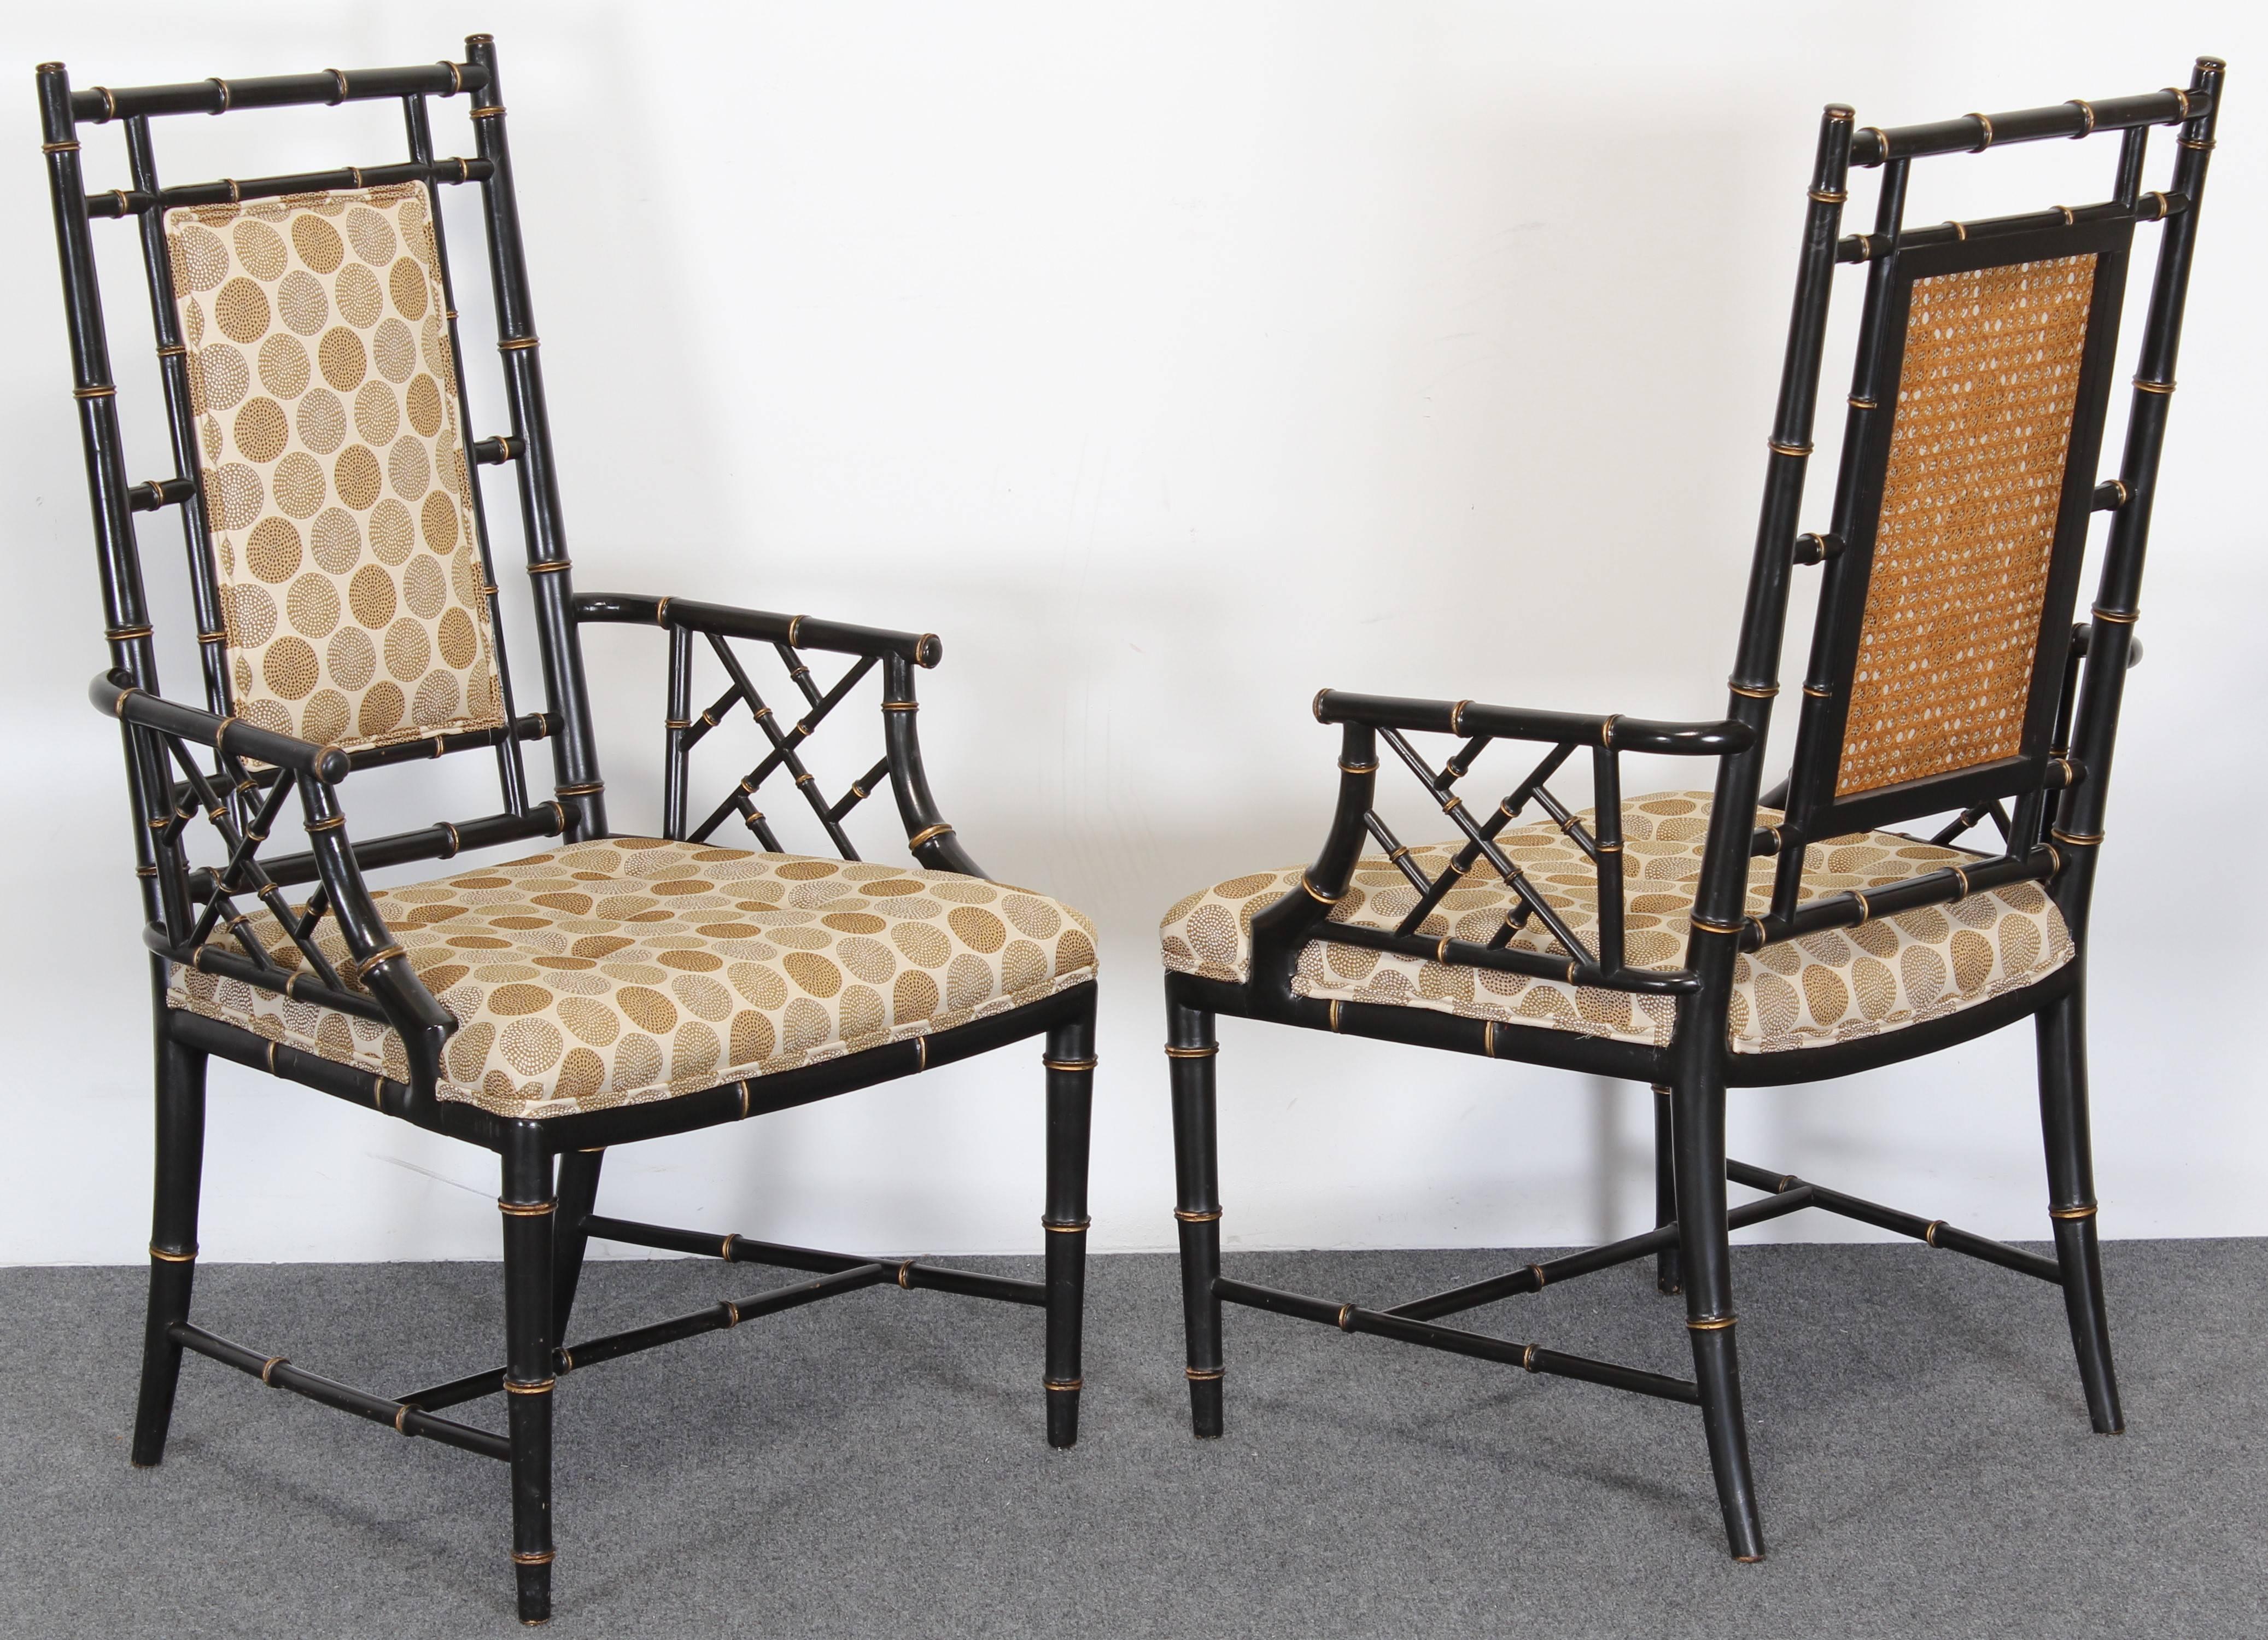 Pair of elegant ebonized faux bamboo chairs with gold accents and cane backs. Originally circa 1960 and more recently upholstered. Very good condition with age appropriate wear as shown in images.